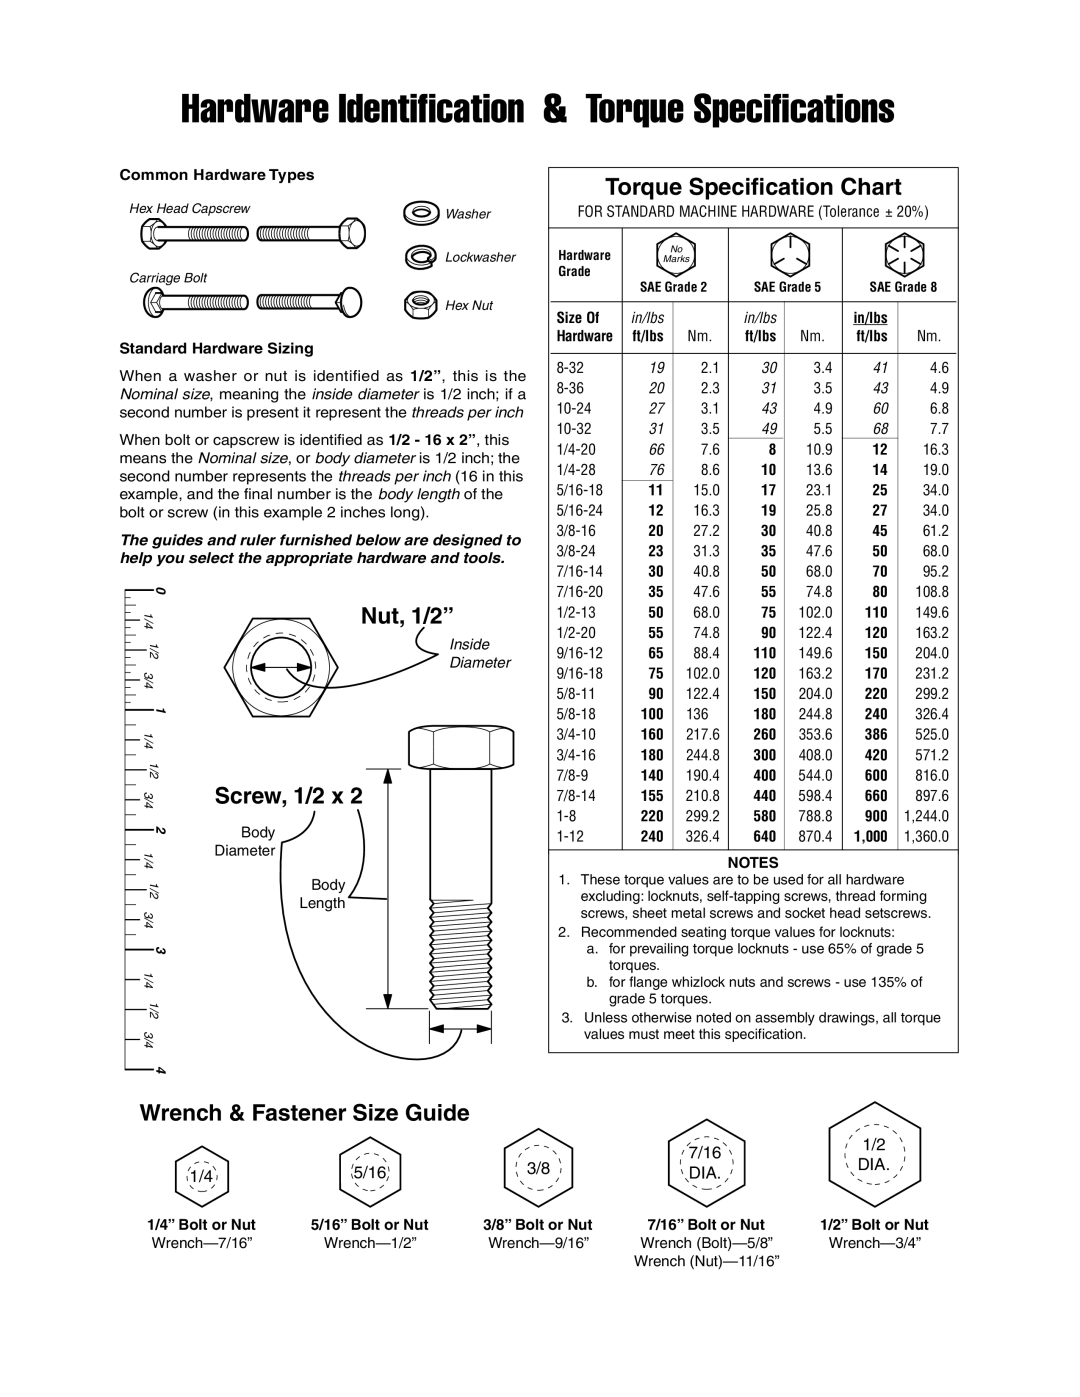 Simplicity 1694958 Wrench & Fastener Size Guide, Hardware Identification & Torque Specifications, Nut, 1/2”, Screw, 1/2 